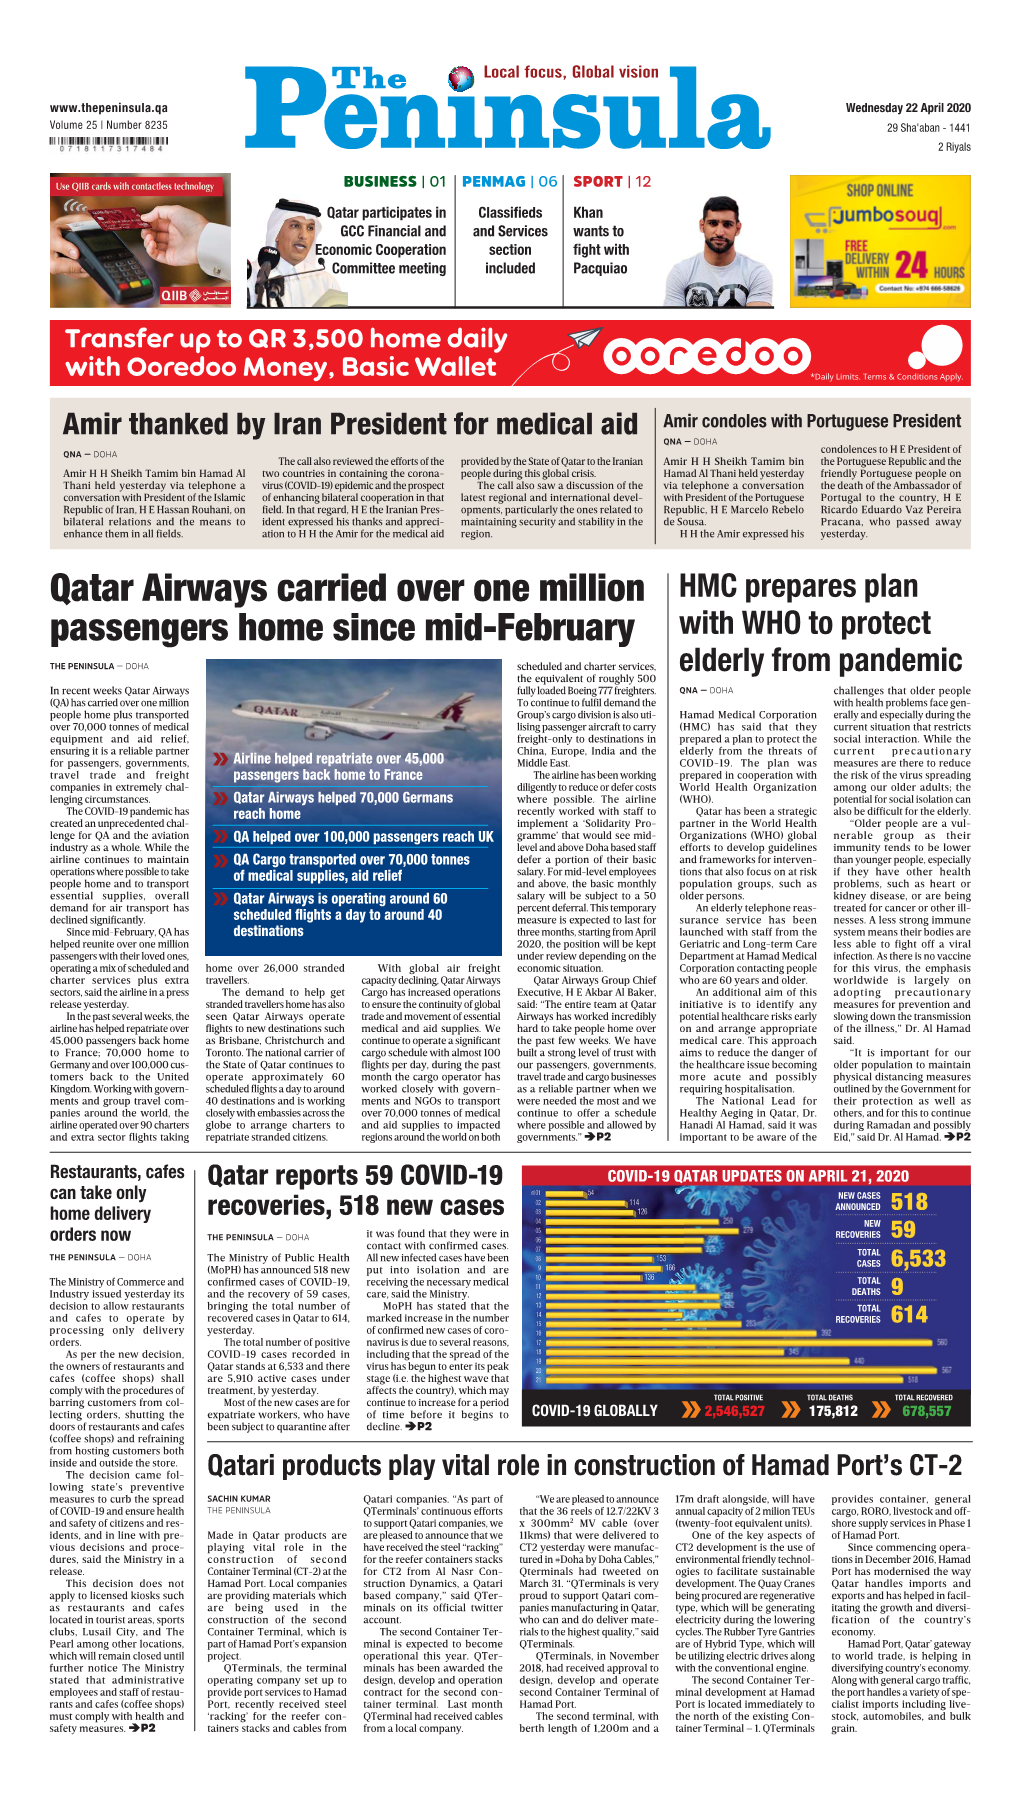 Qatar Airways Carried Over One Million Passengers Home Since Mid-February